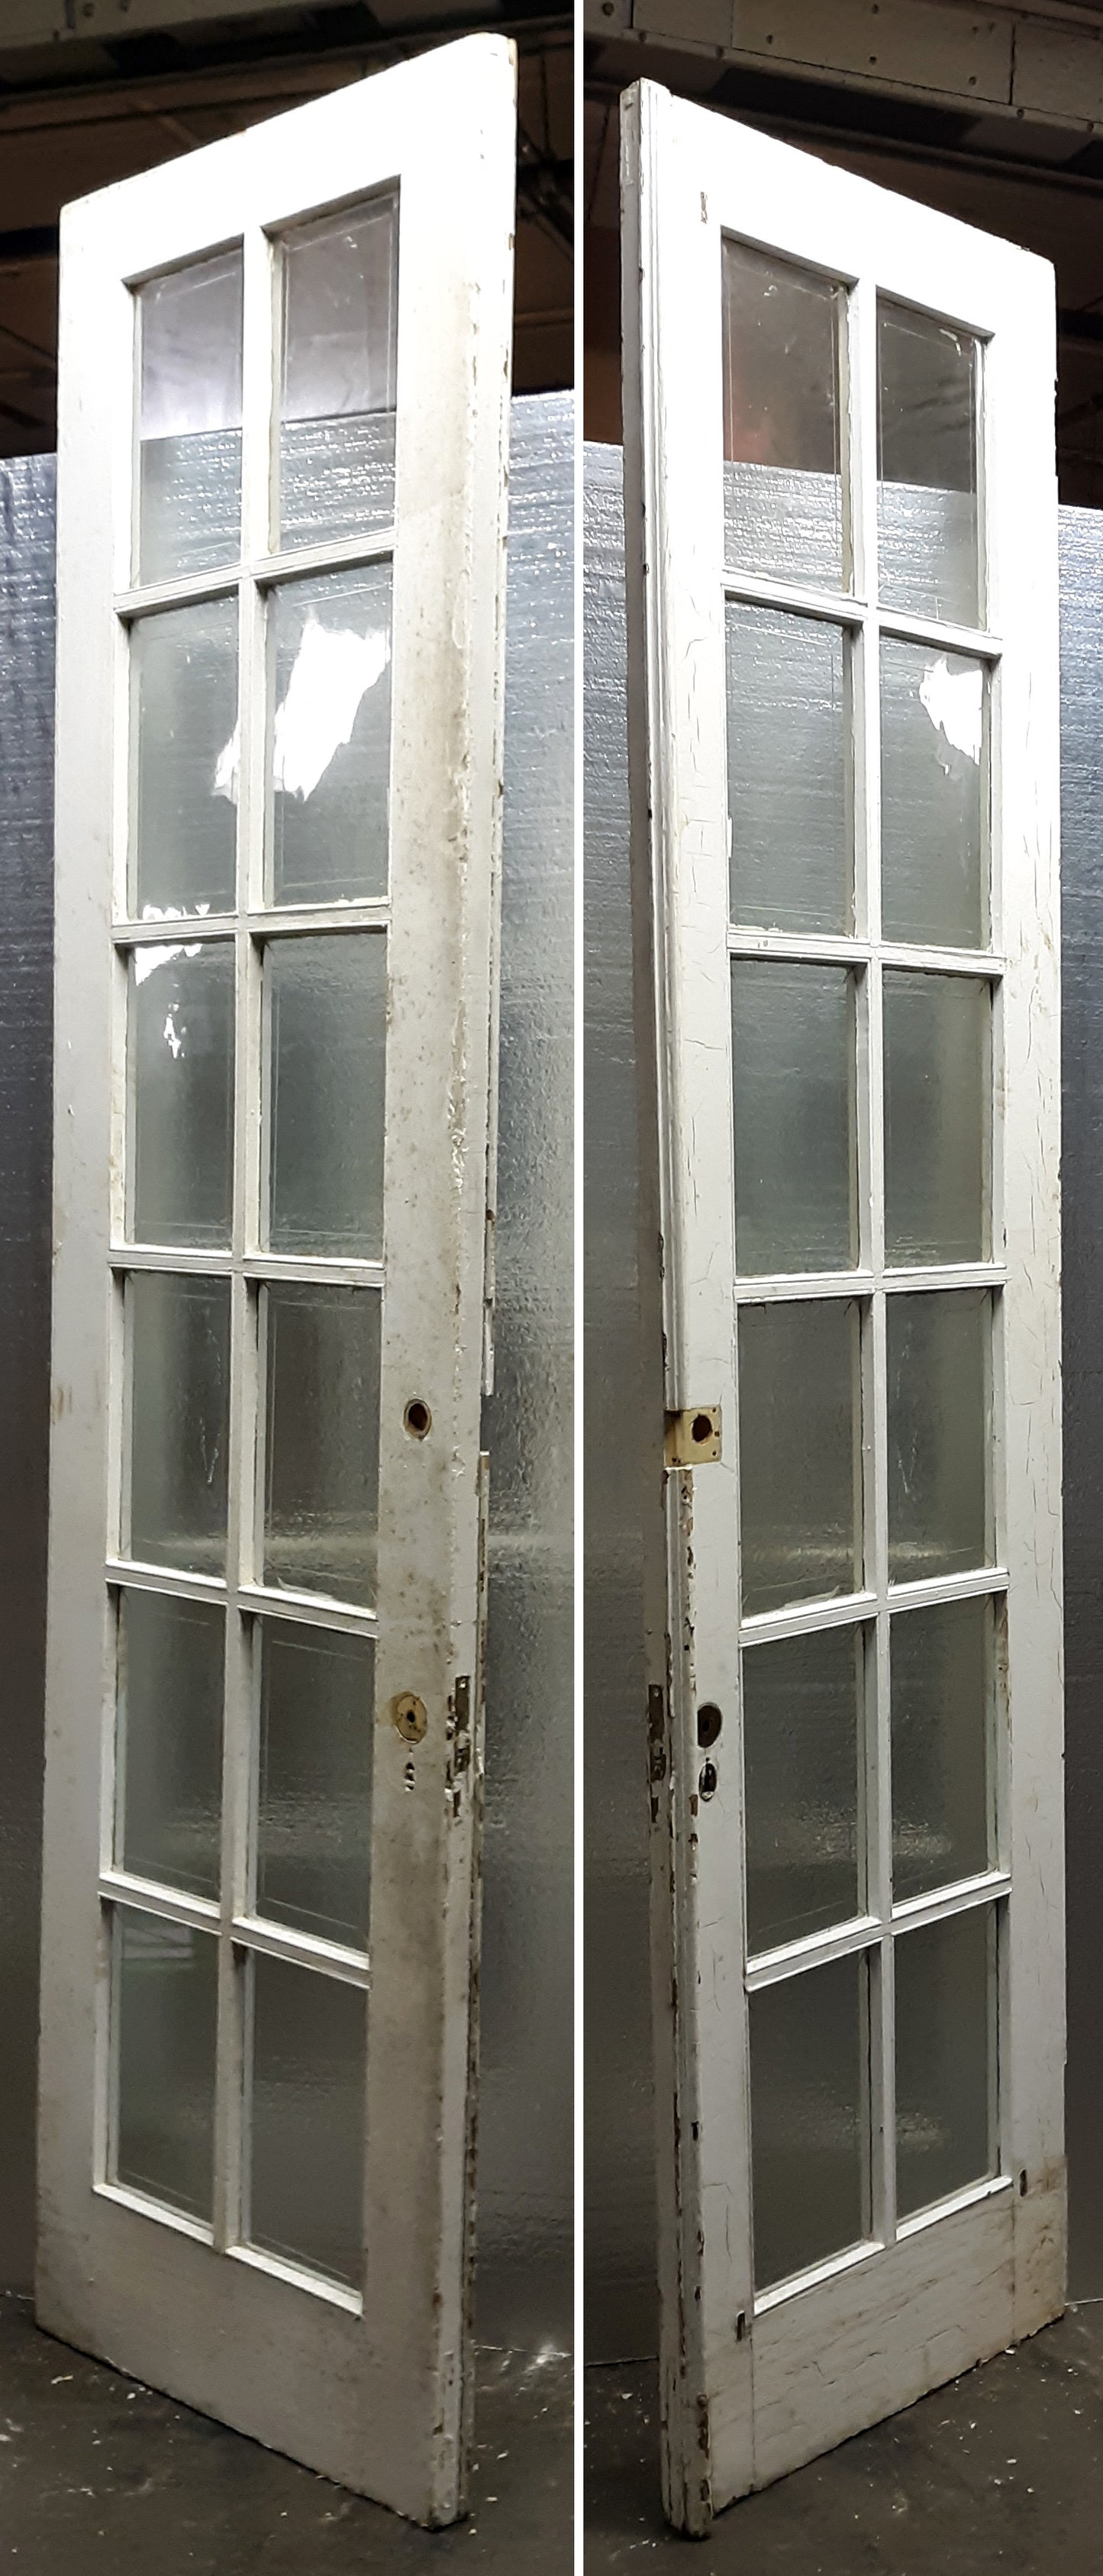 60"x107.5"x1.5" Pair Antique Vintage Old Reclaimed Salvaged French Double Exterior Wood Wooden Doors Windows Glass